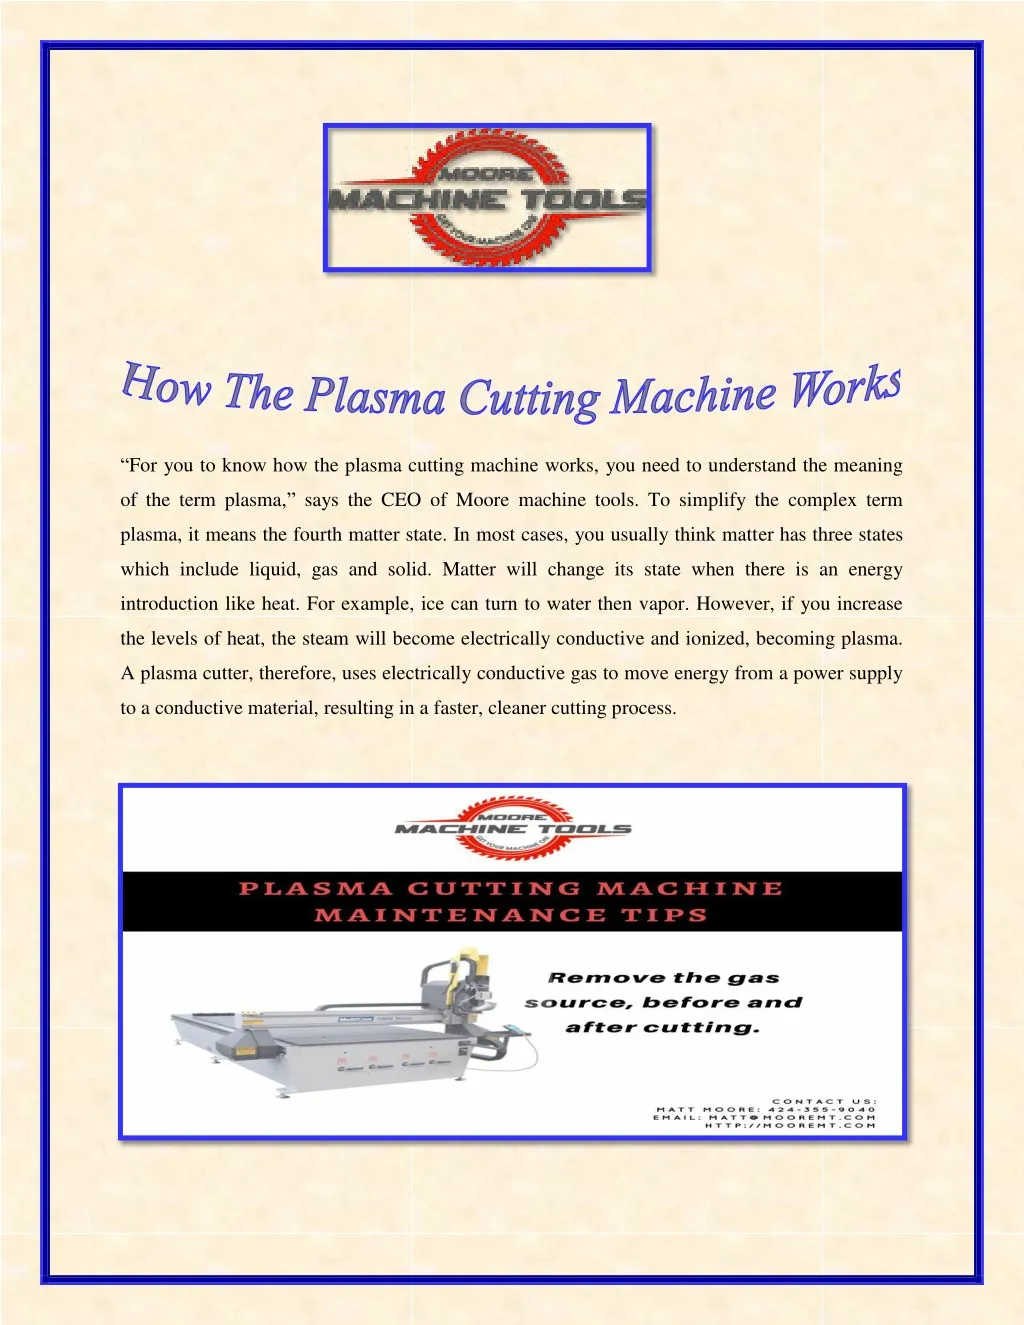 for you to know how the plasma cutting machine